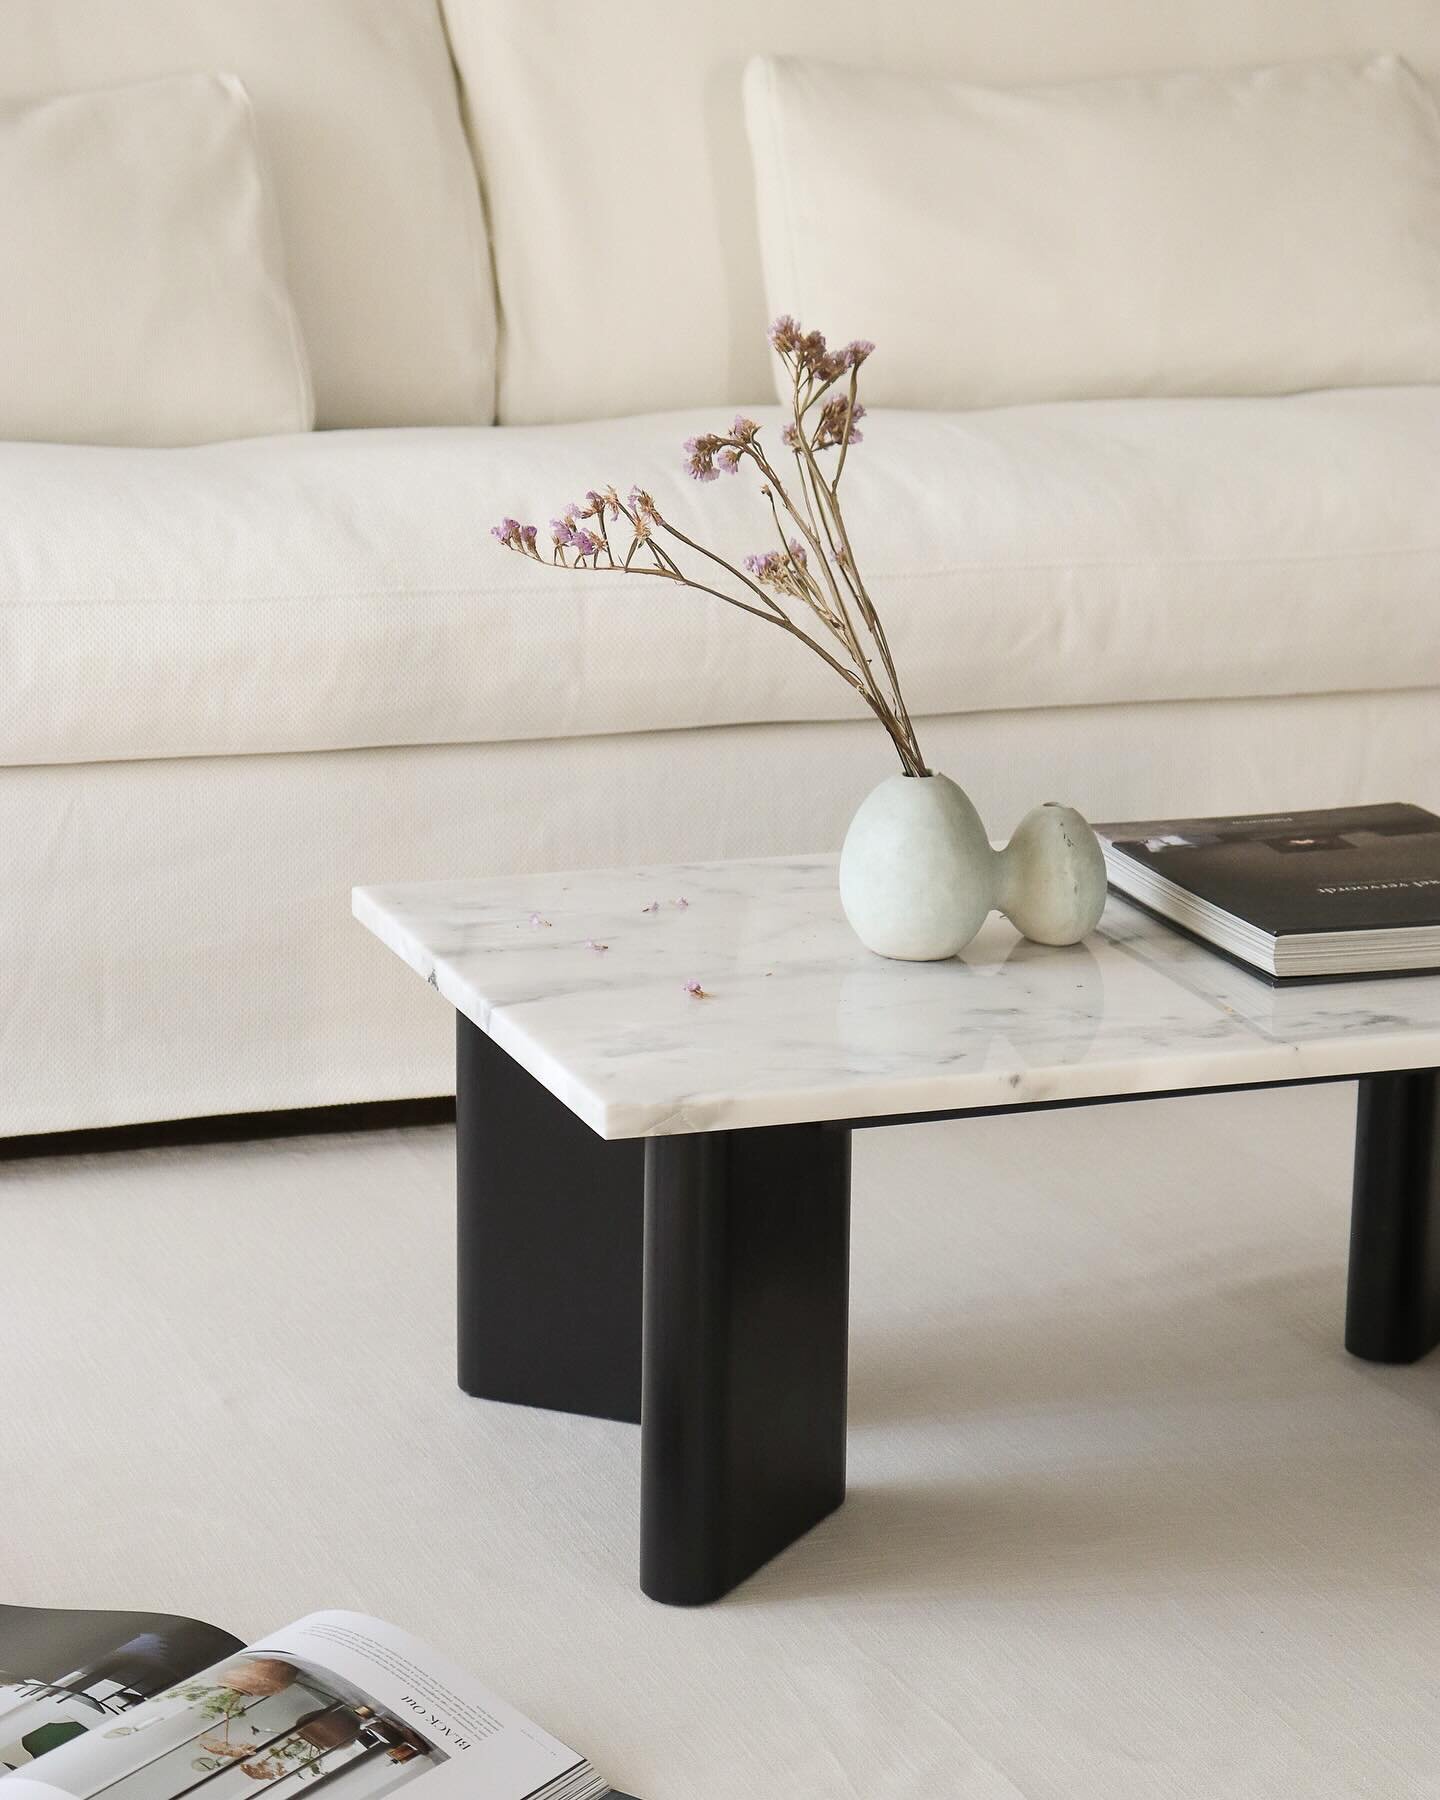 Timeless addition to any space, our Kingston coffee table brings with it understated elegance of unique marble top and contrasting woodden legs.